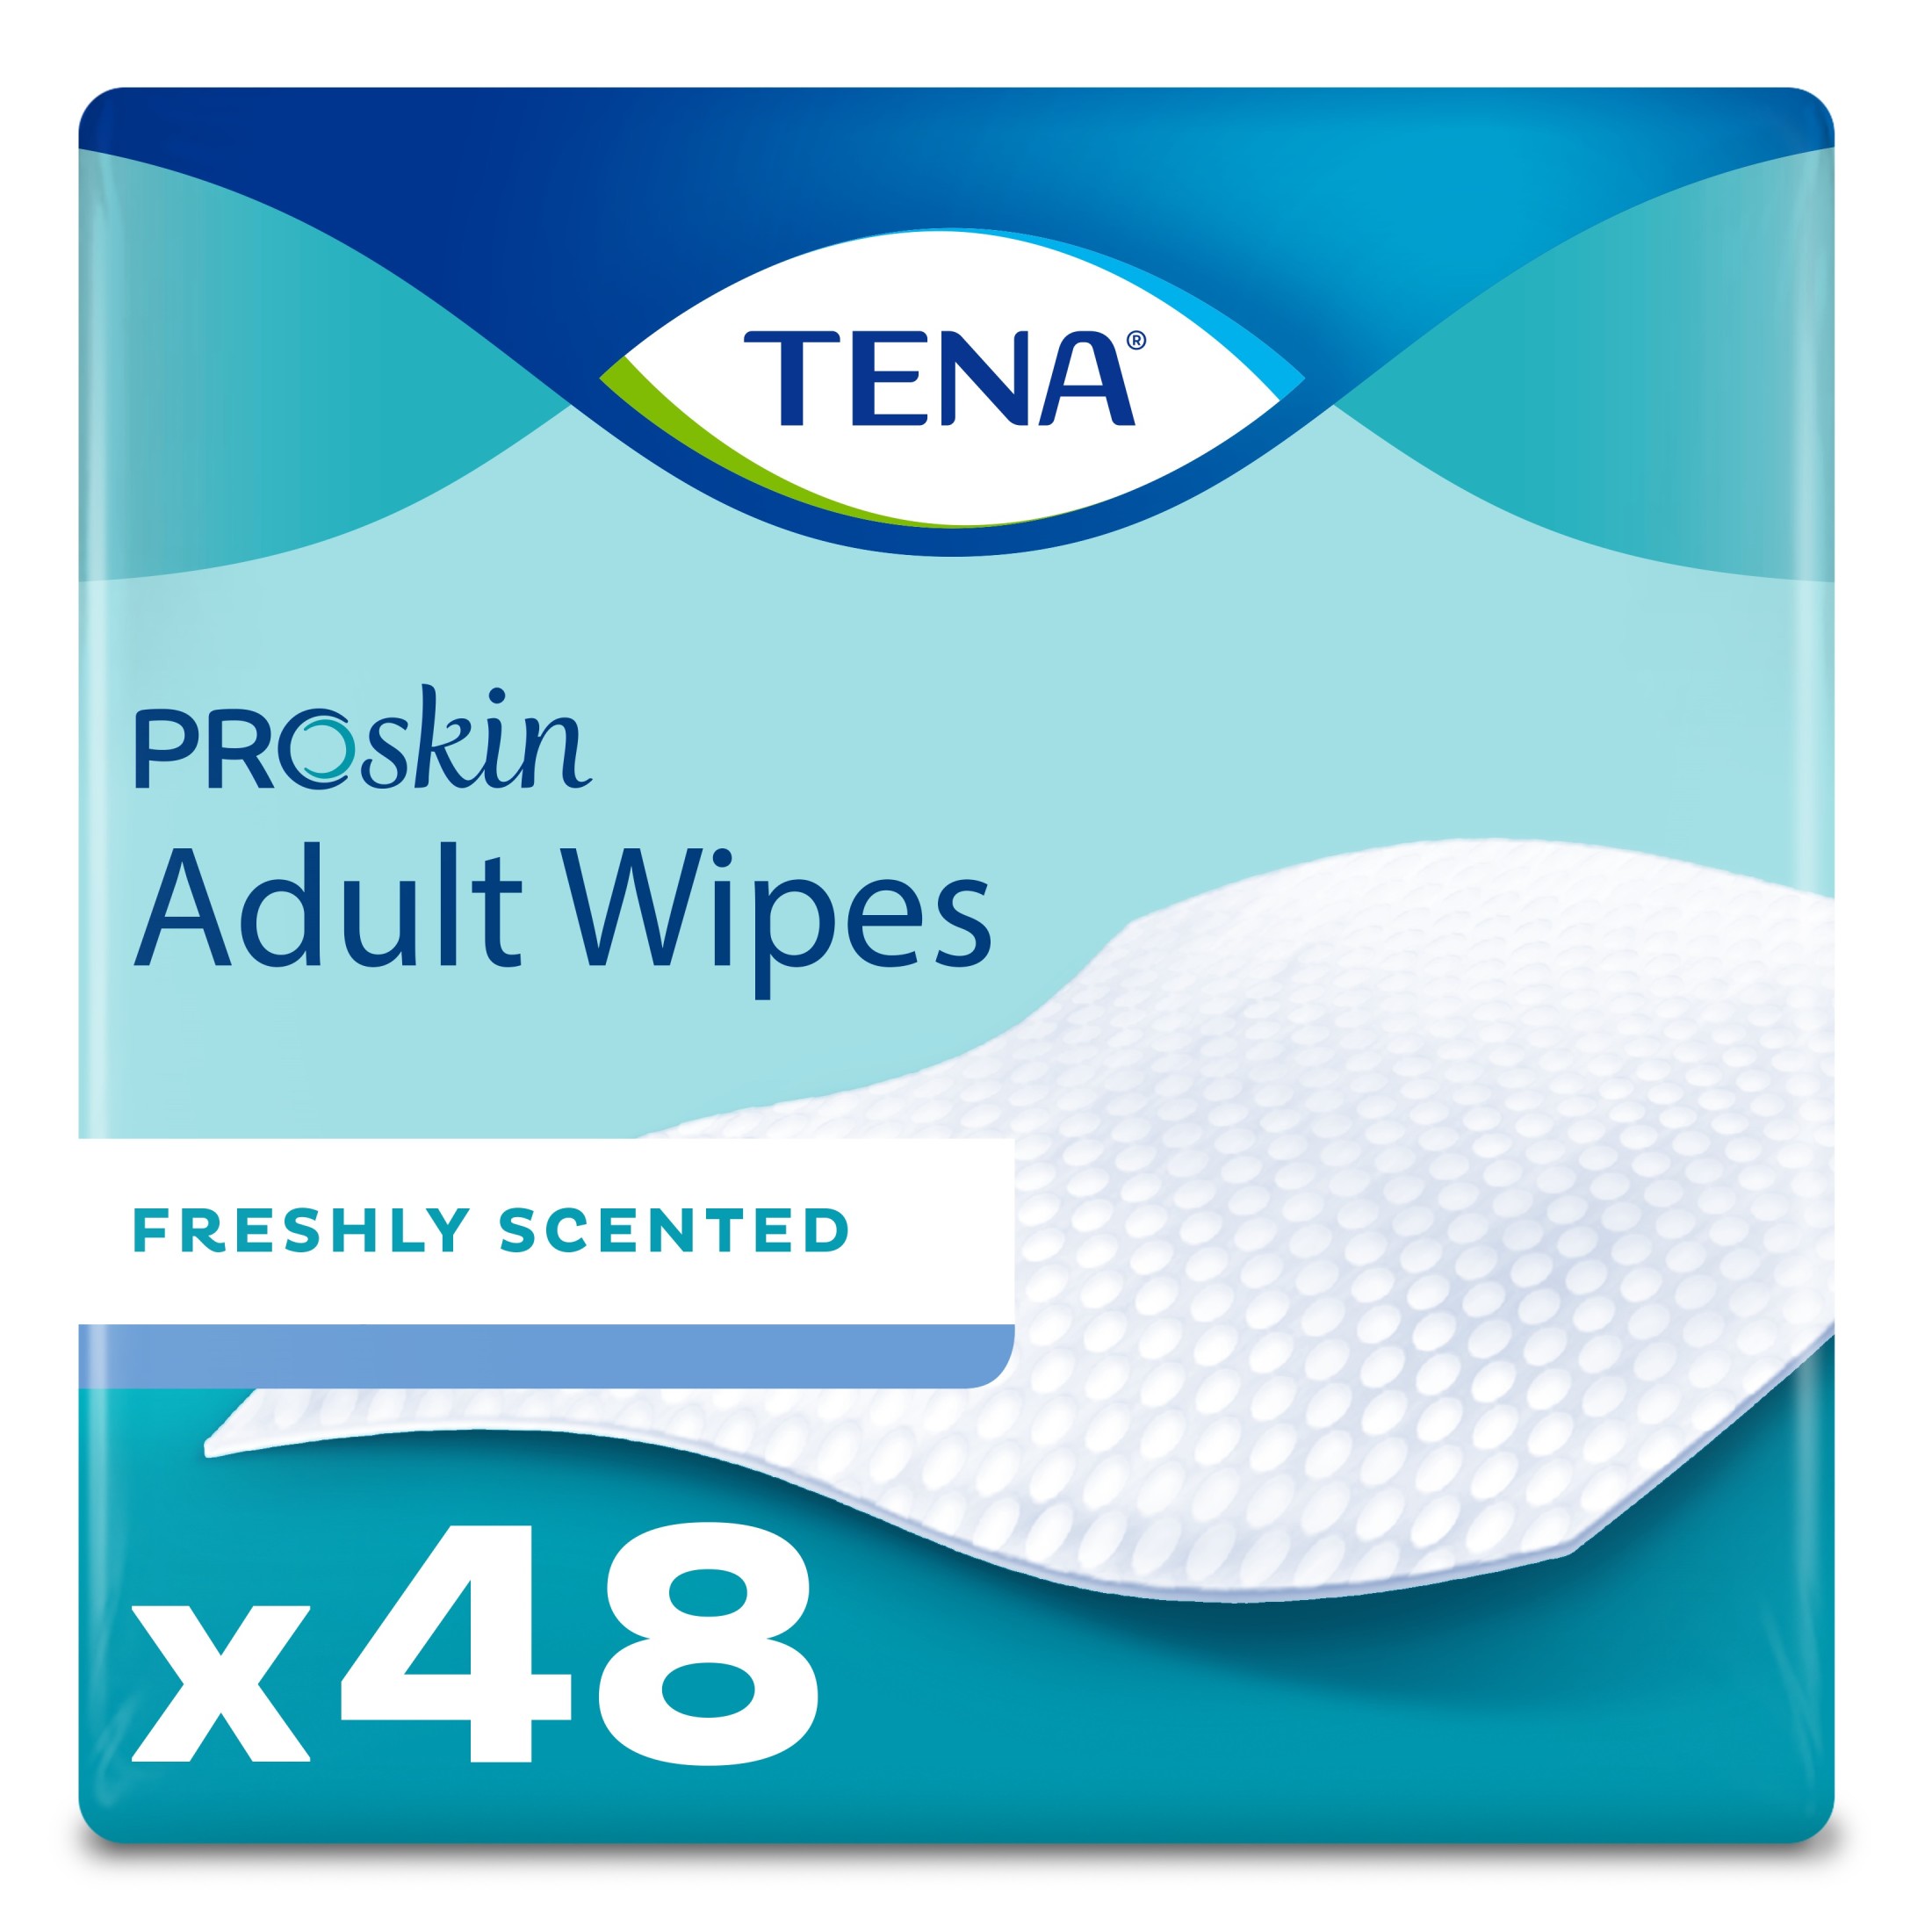 Tena ProSkin Ultra Adult Wipes, 48 Ct - image 1 of 8